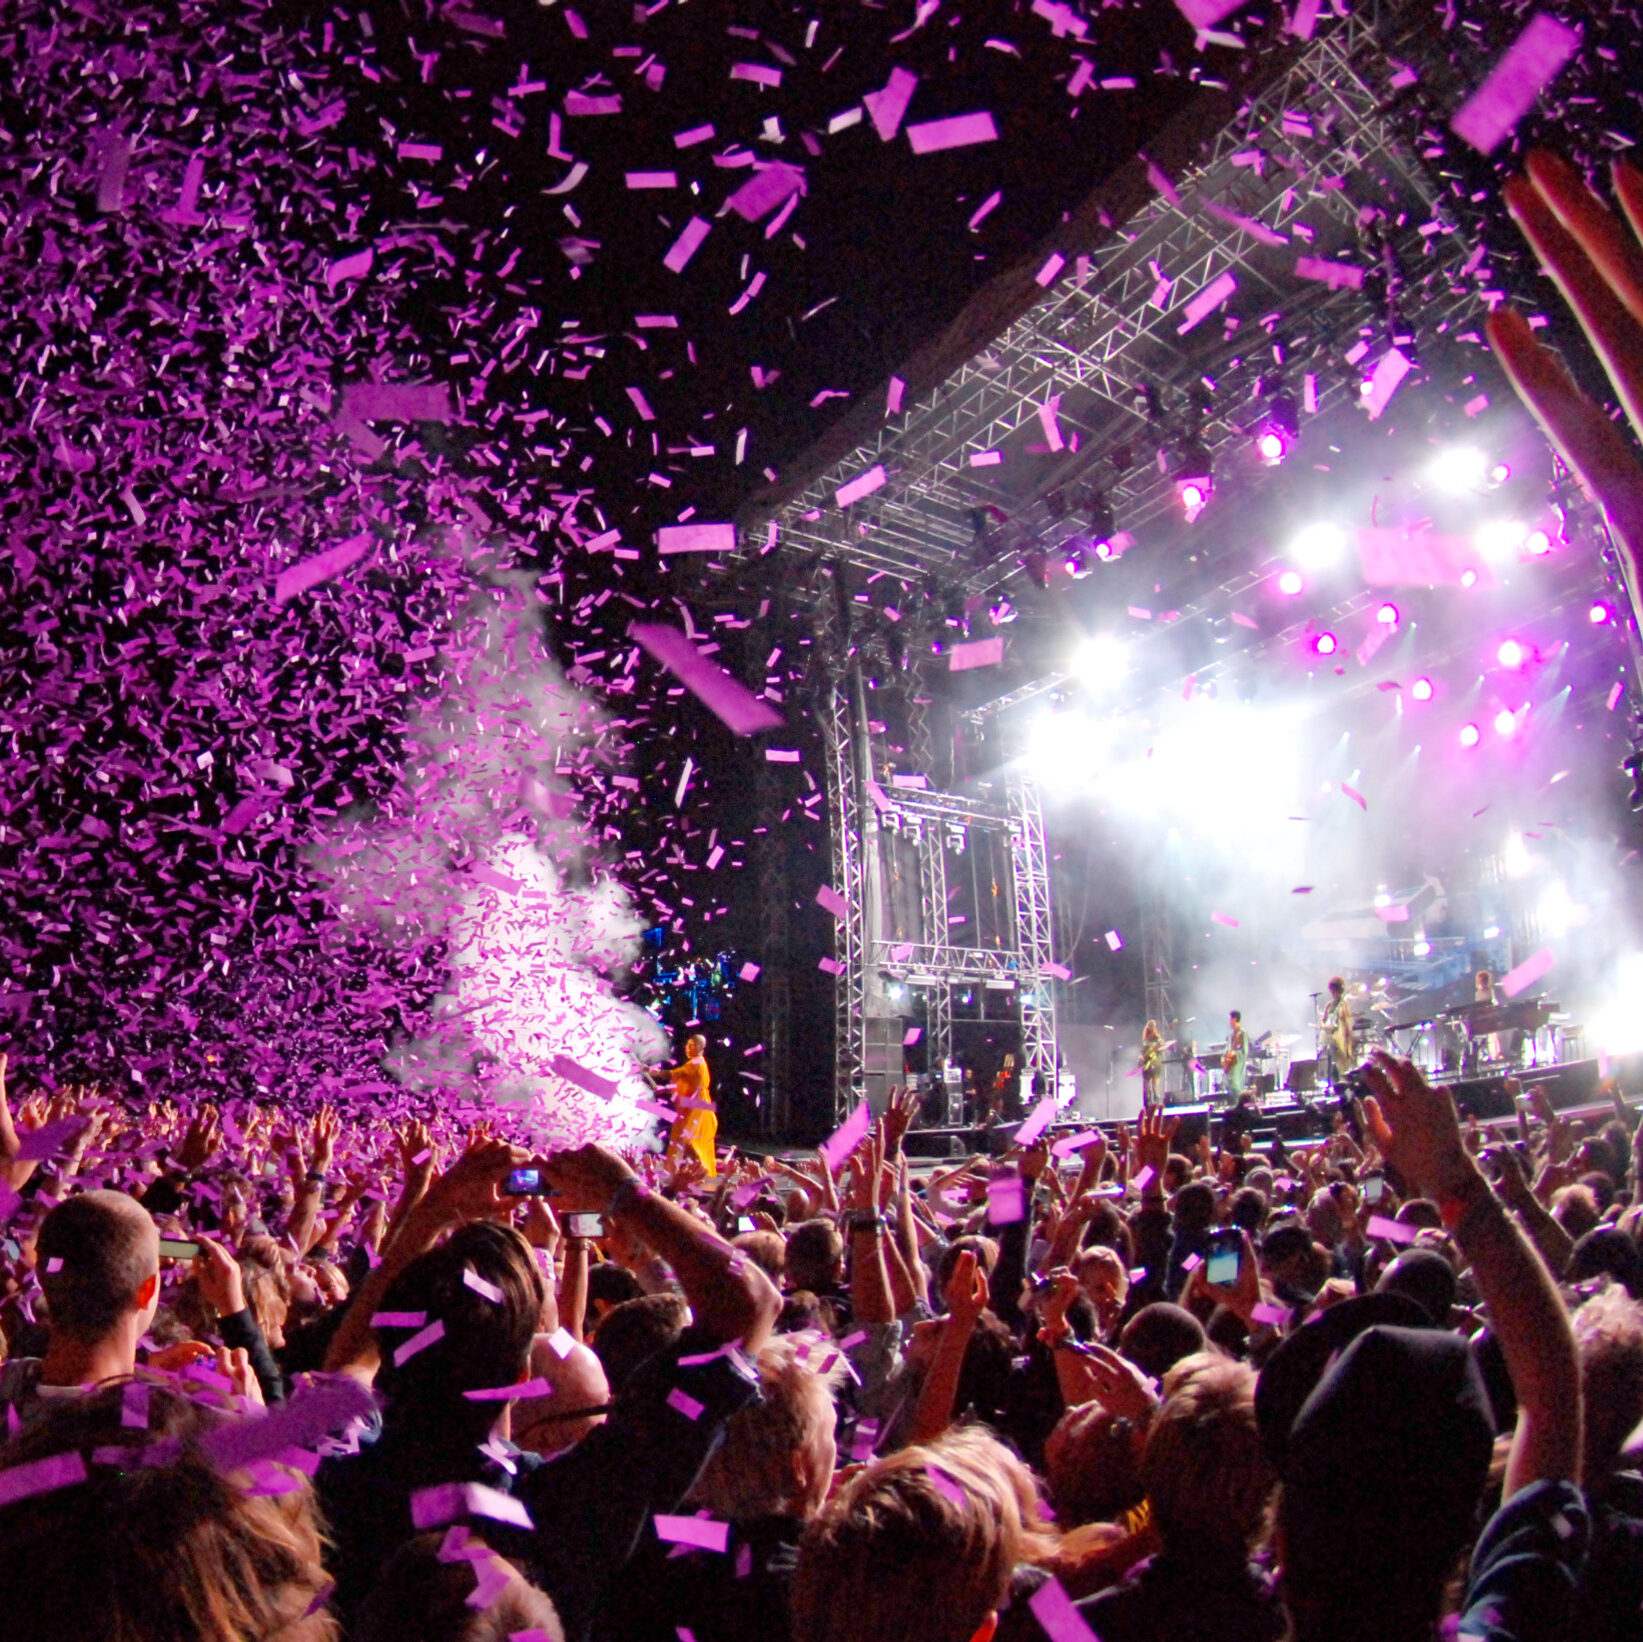 Big audience at a concert, with purple confetti flying in the air.